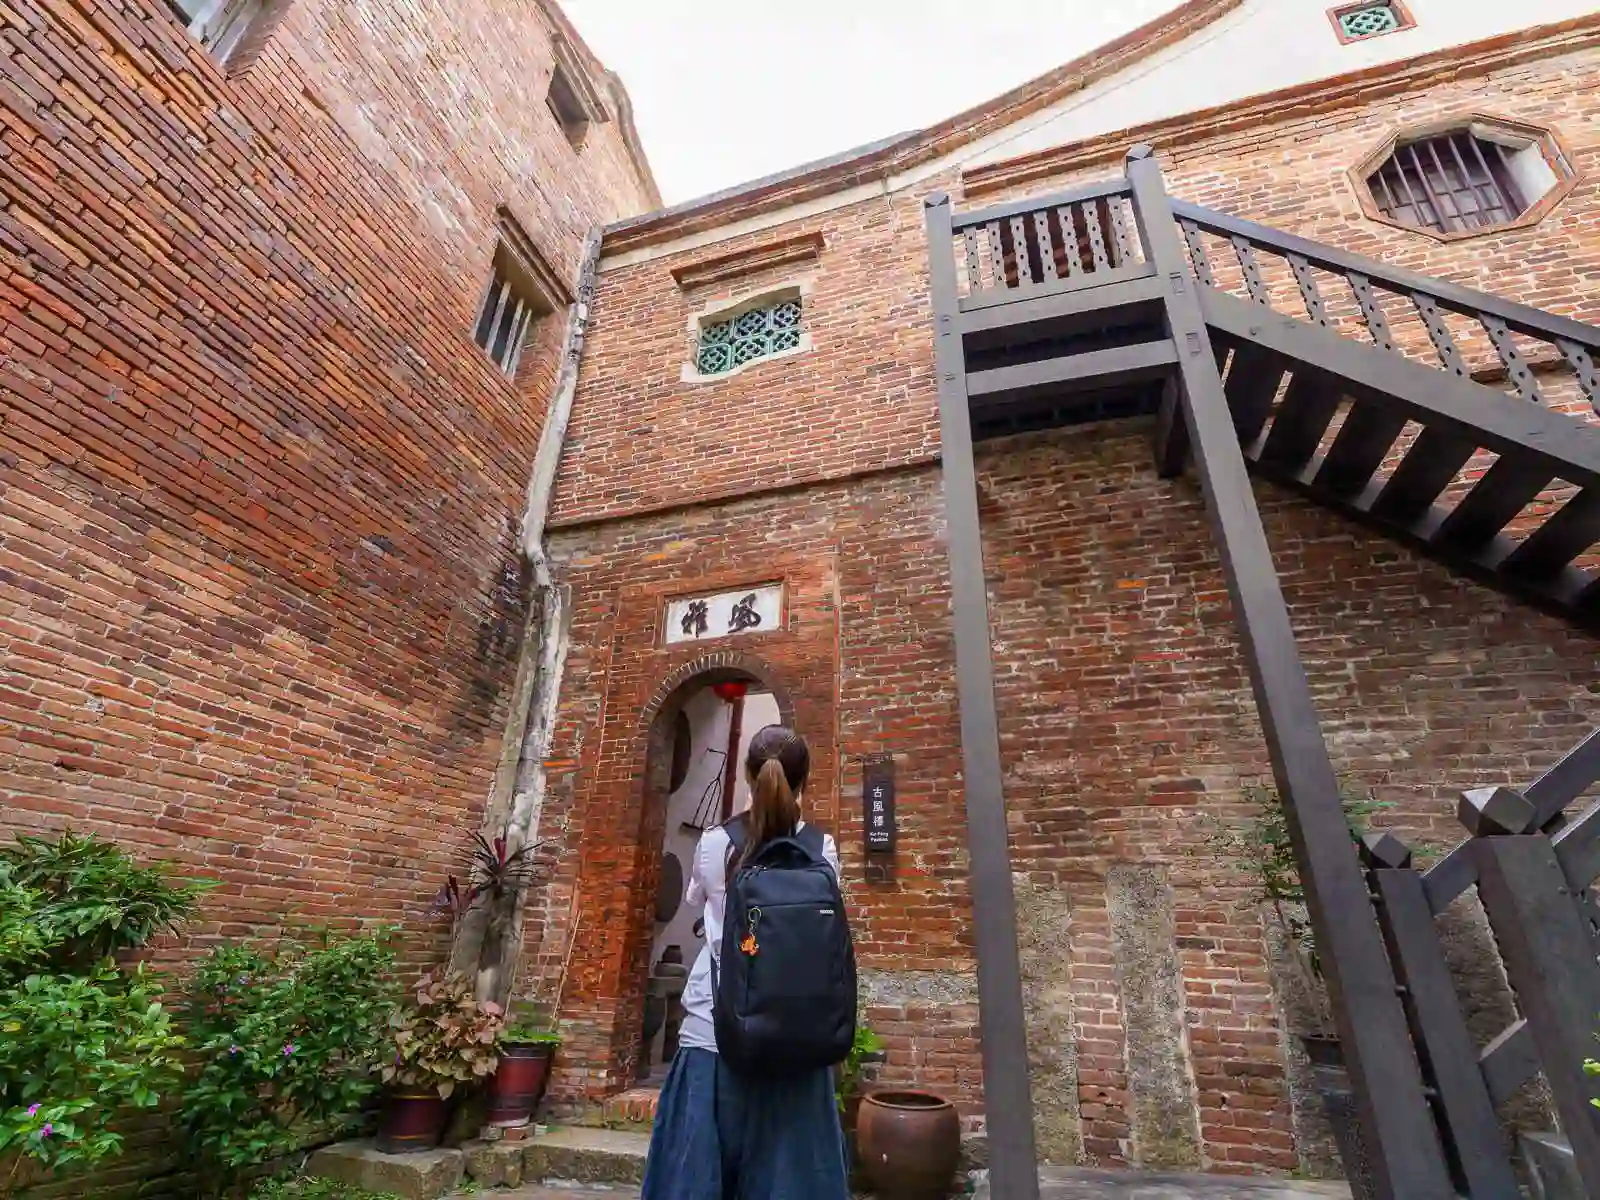 A tourist looks on at a red-brick doorway in a courtyard of the museum.